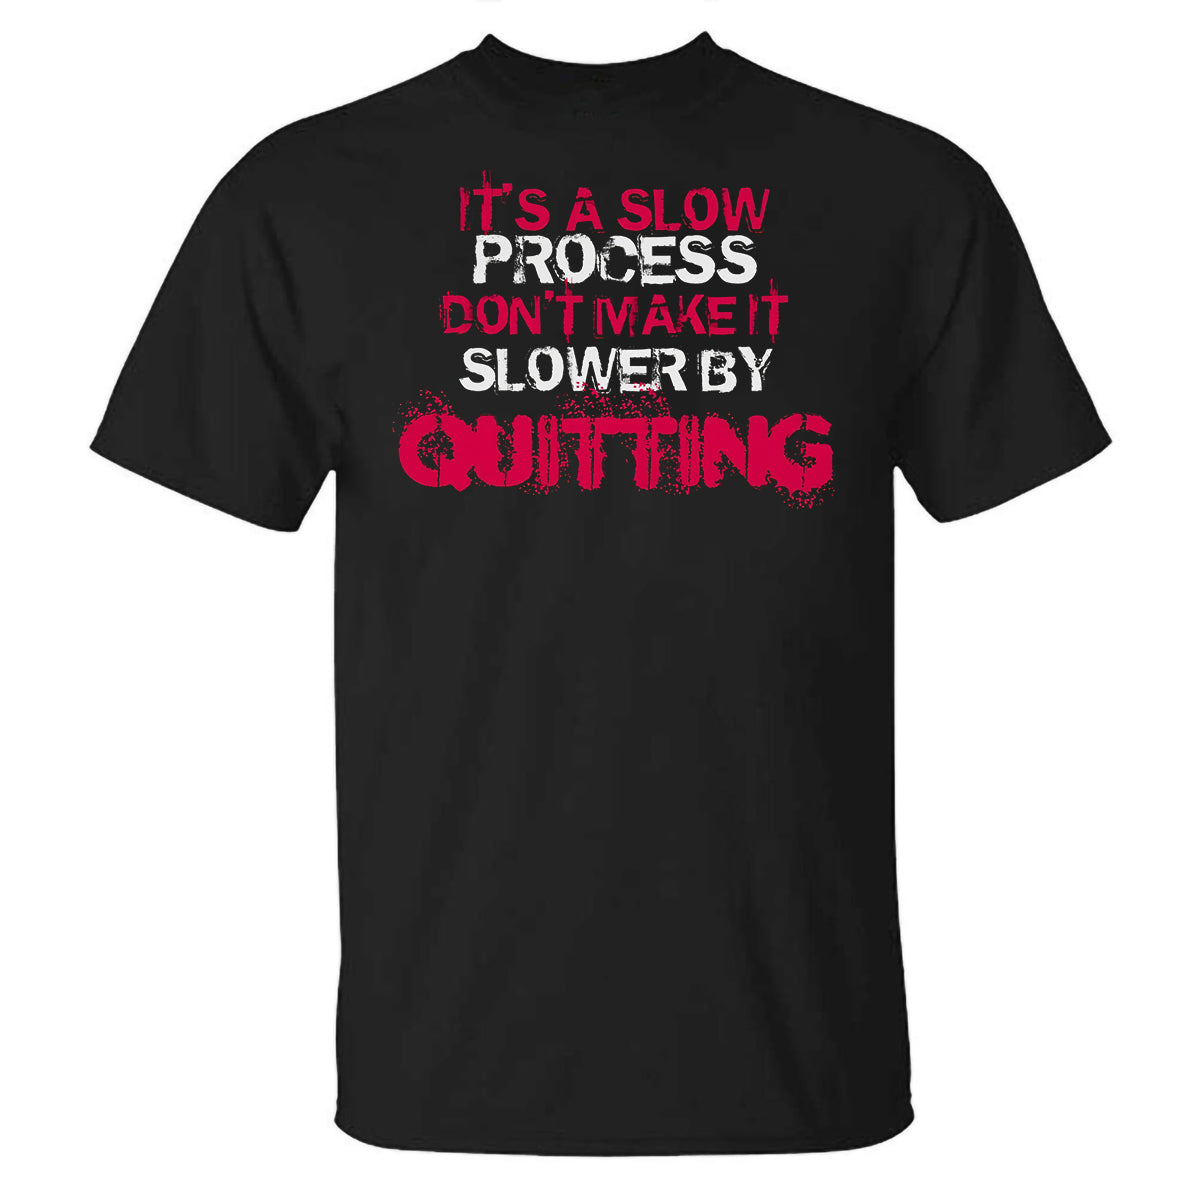 It's A Slow Process Don't Make It Slower By Quitting Printed T-shirt